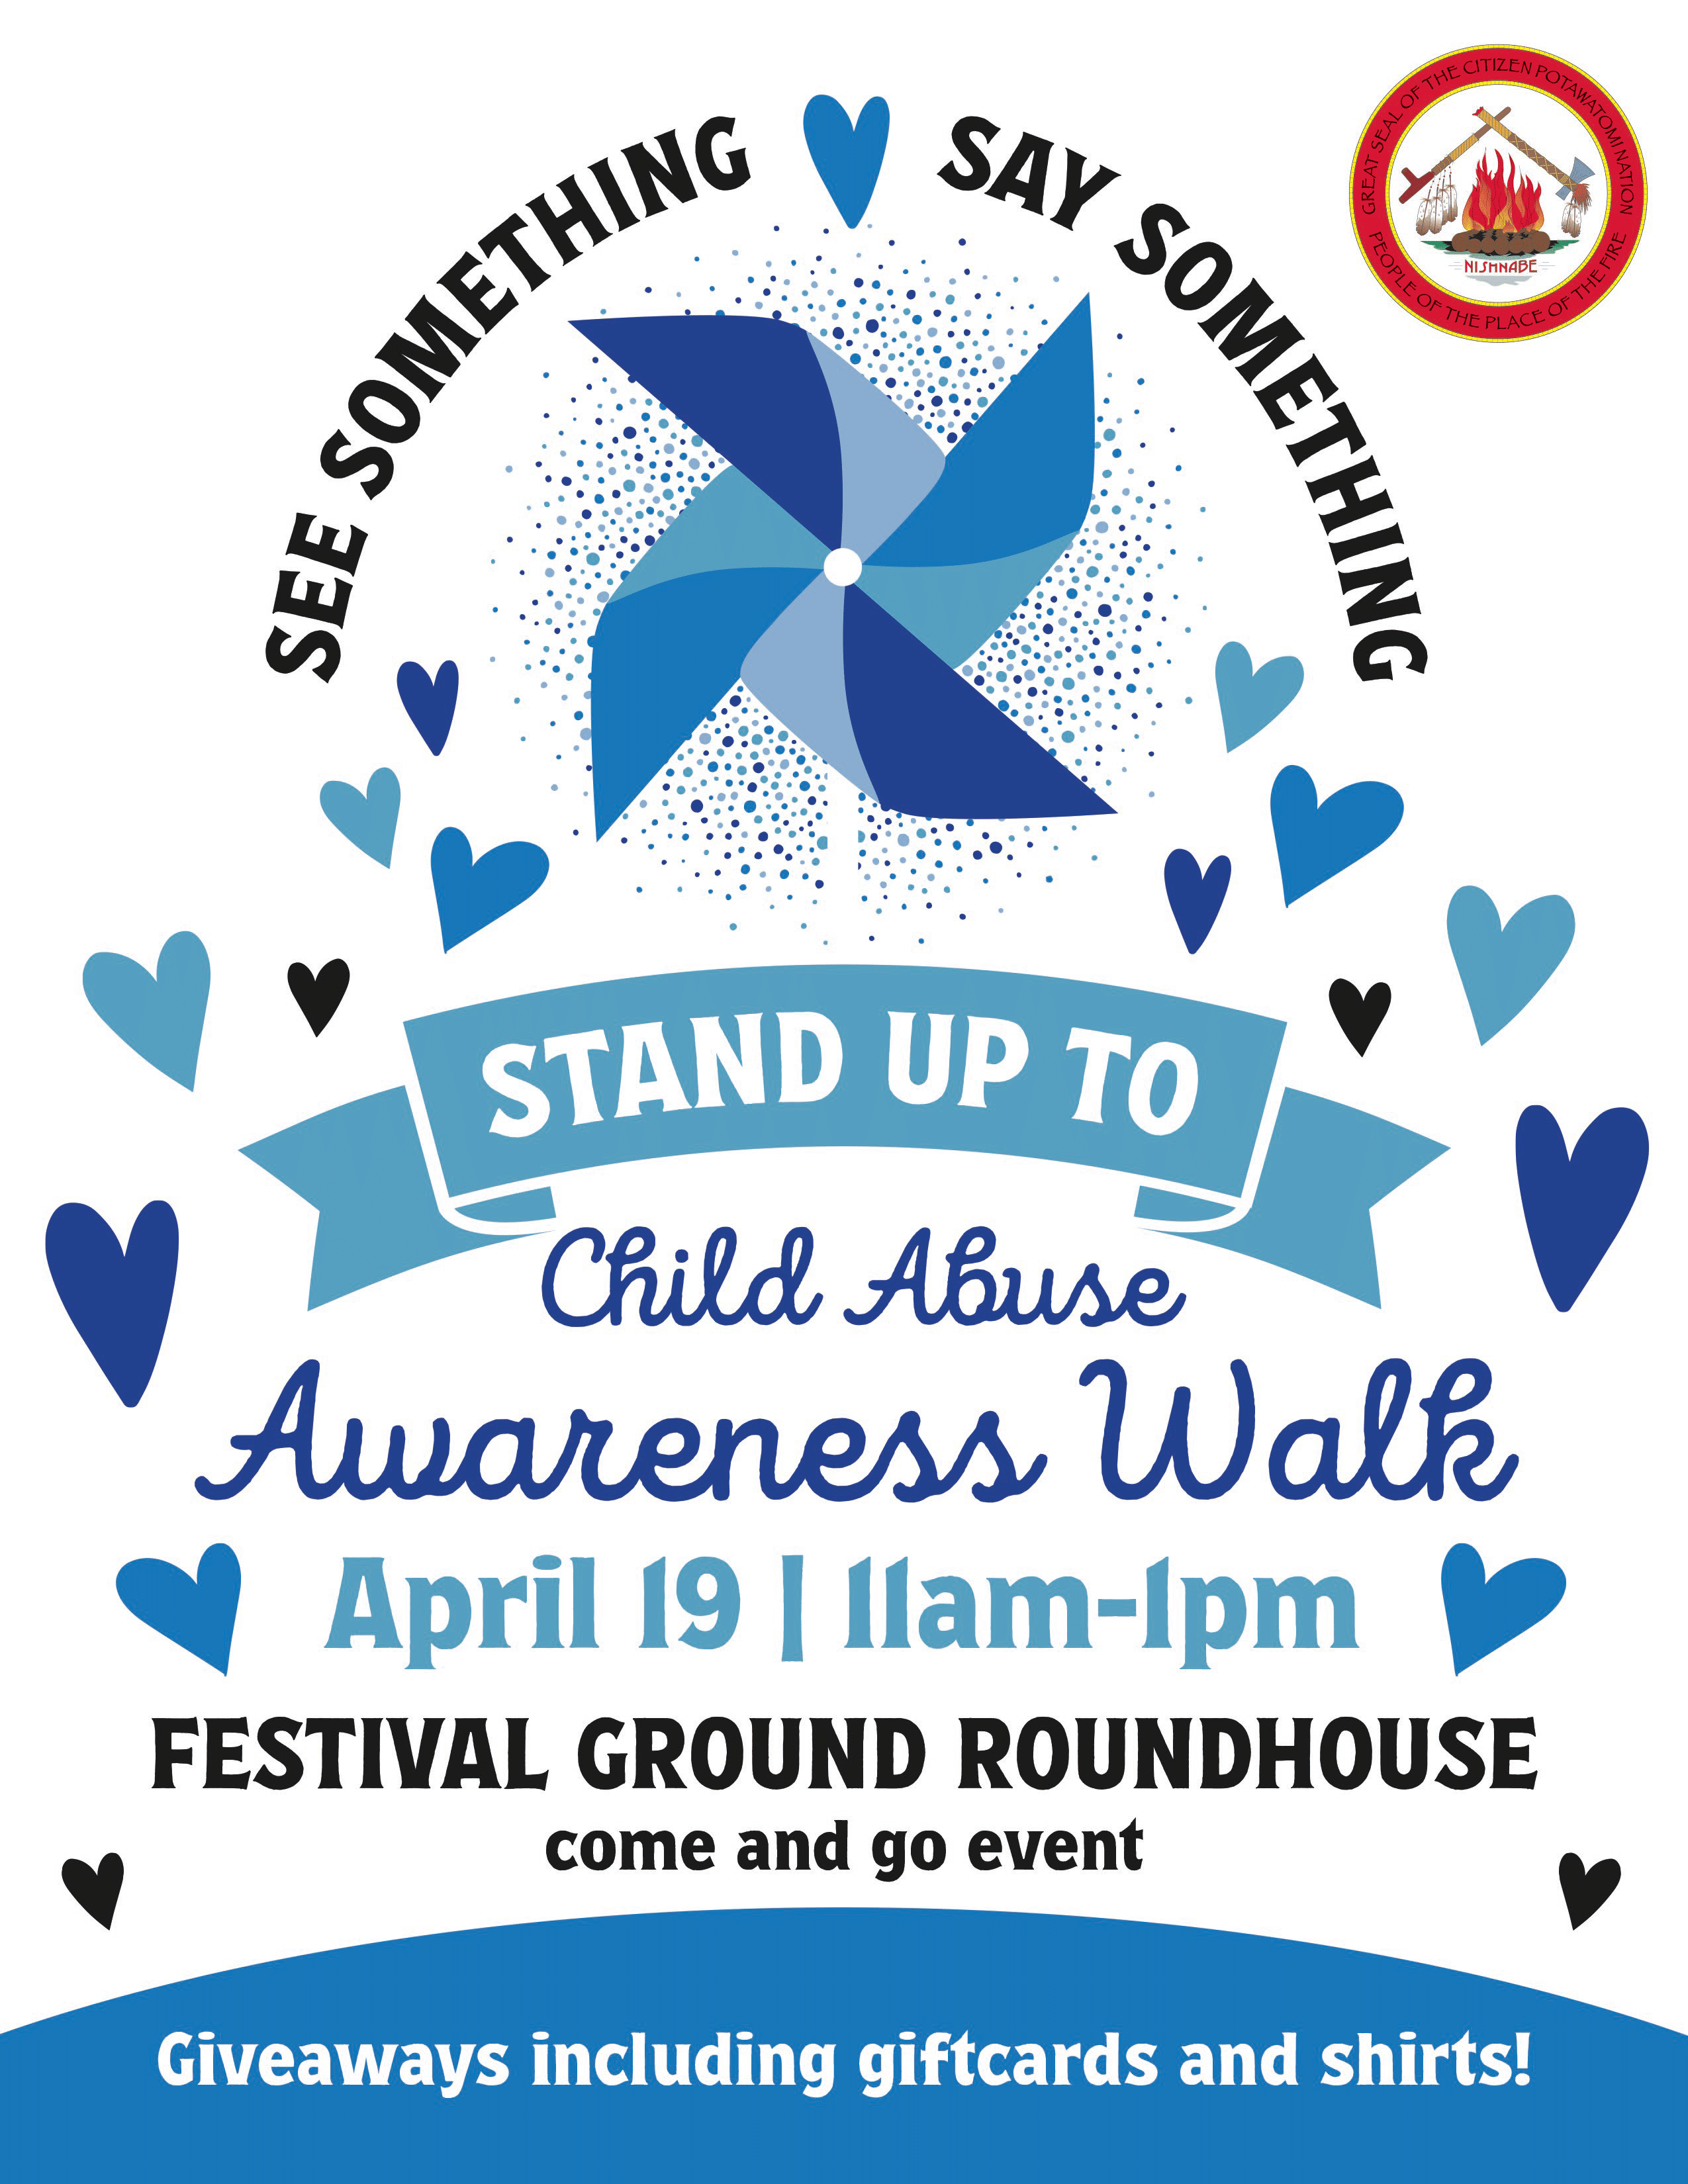 Hearts in shades of blue radiate away from a pinwheel also in blue. The flyer advertises a Child Abuse Awareness walk on April 19, 2024.